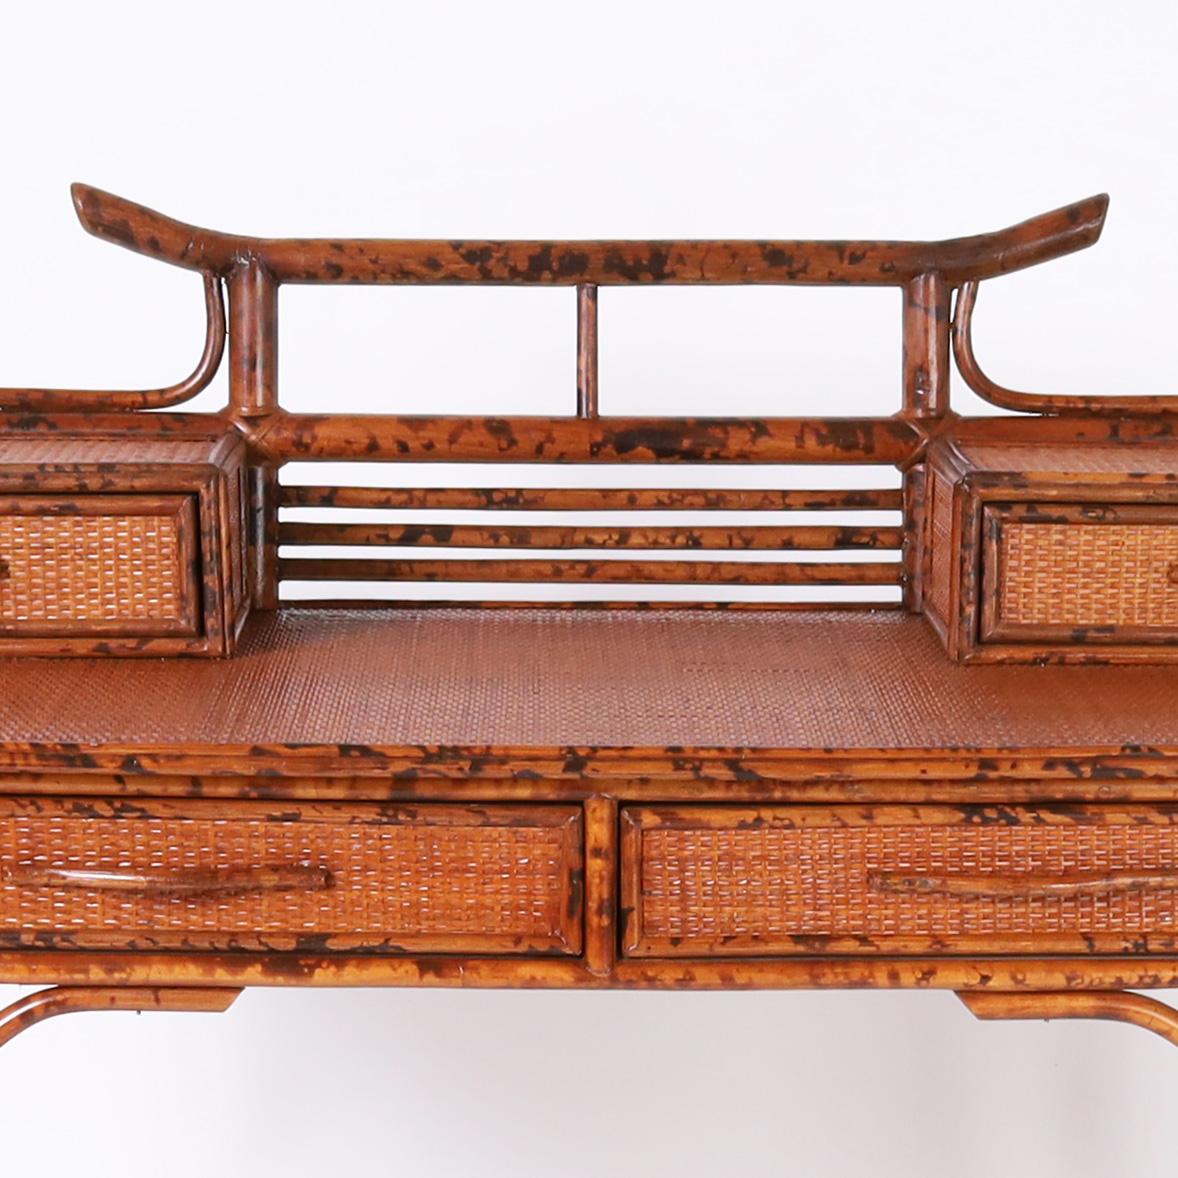 20th Century British Colonial Style Faux Bamboo and Grasscloth Pagoda Desk For Sale